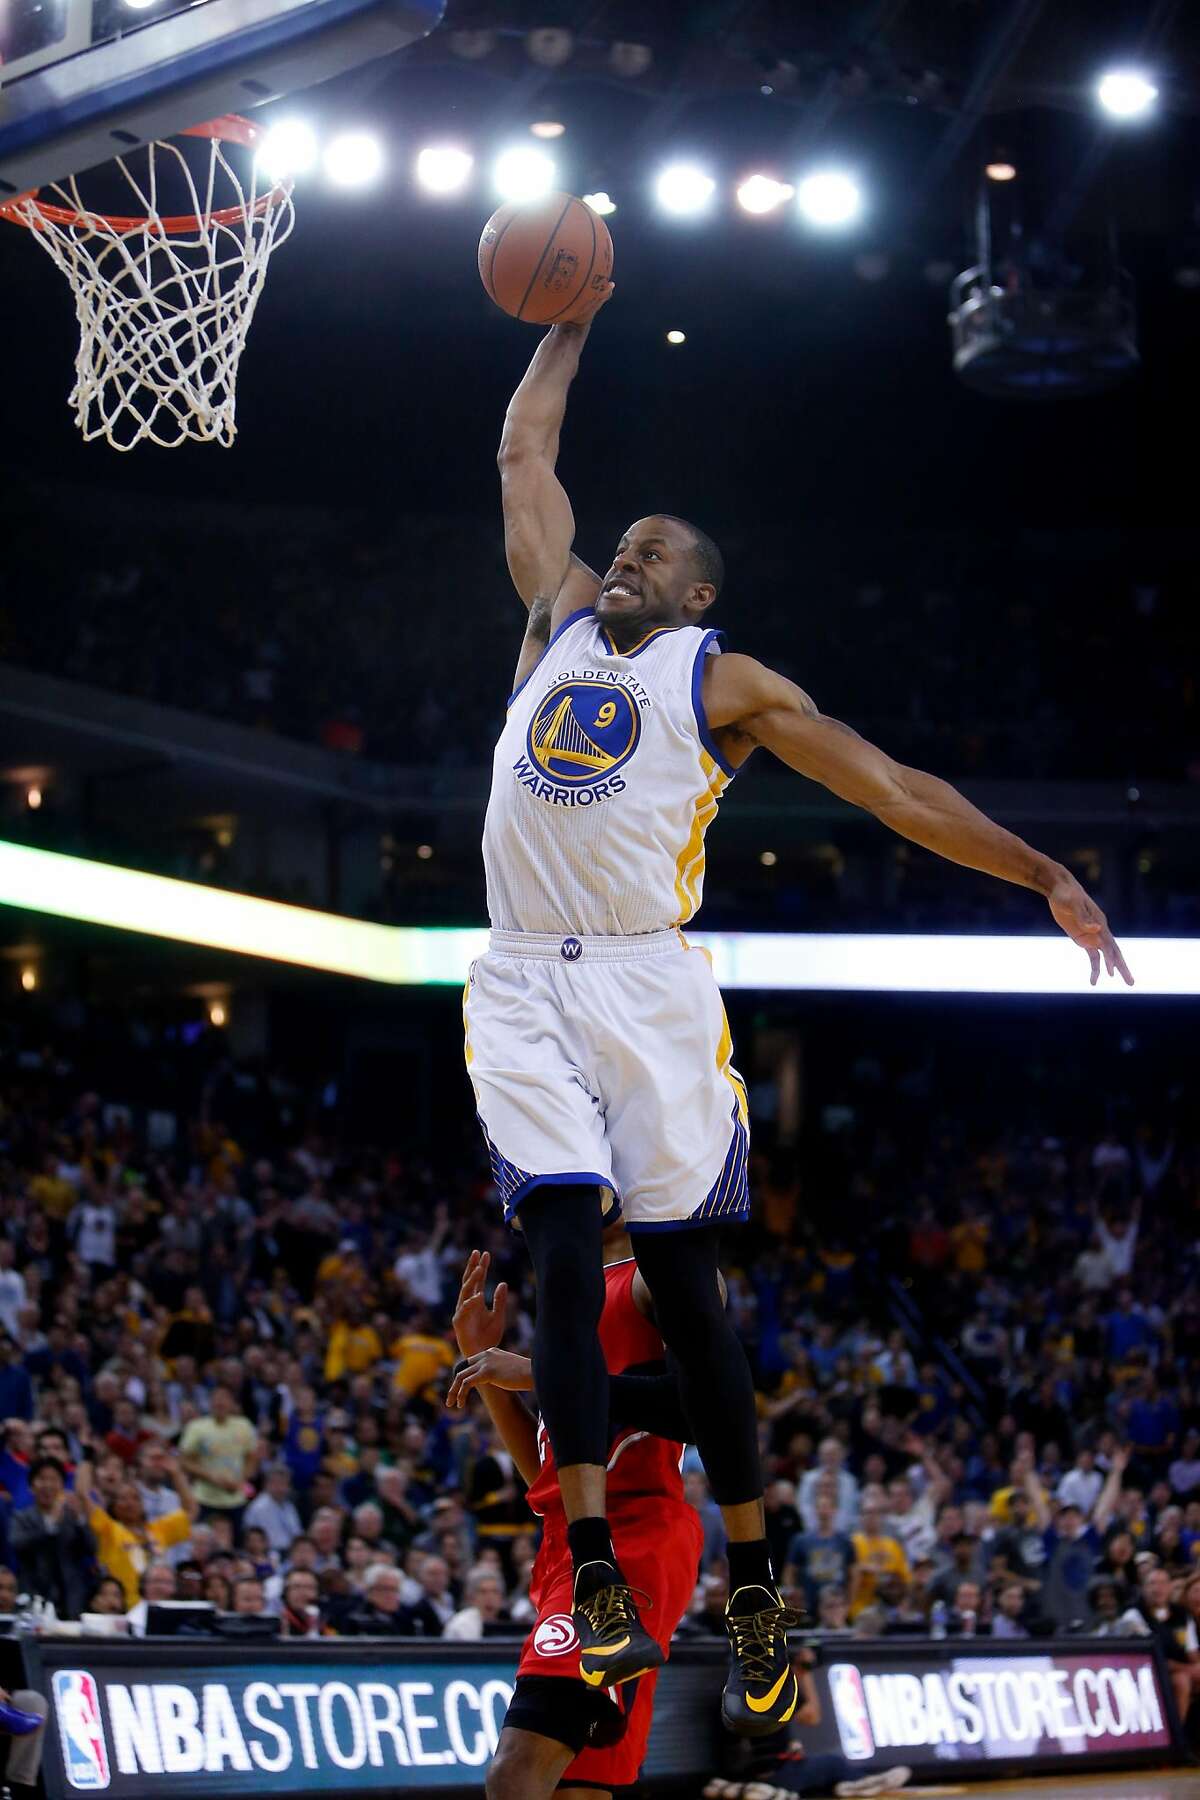 Golden State Warriors' Andre Iguodala dunks against Atlanta Hawks in 4th quarter during NBA game at Oracle Arena in Oakland, Calif., on Wednesday, March 18, 2015.